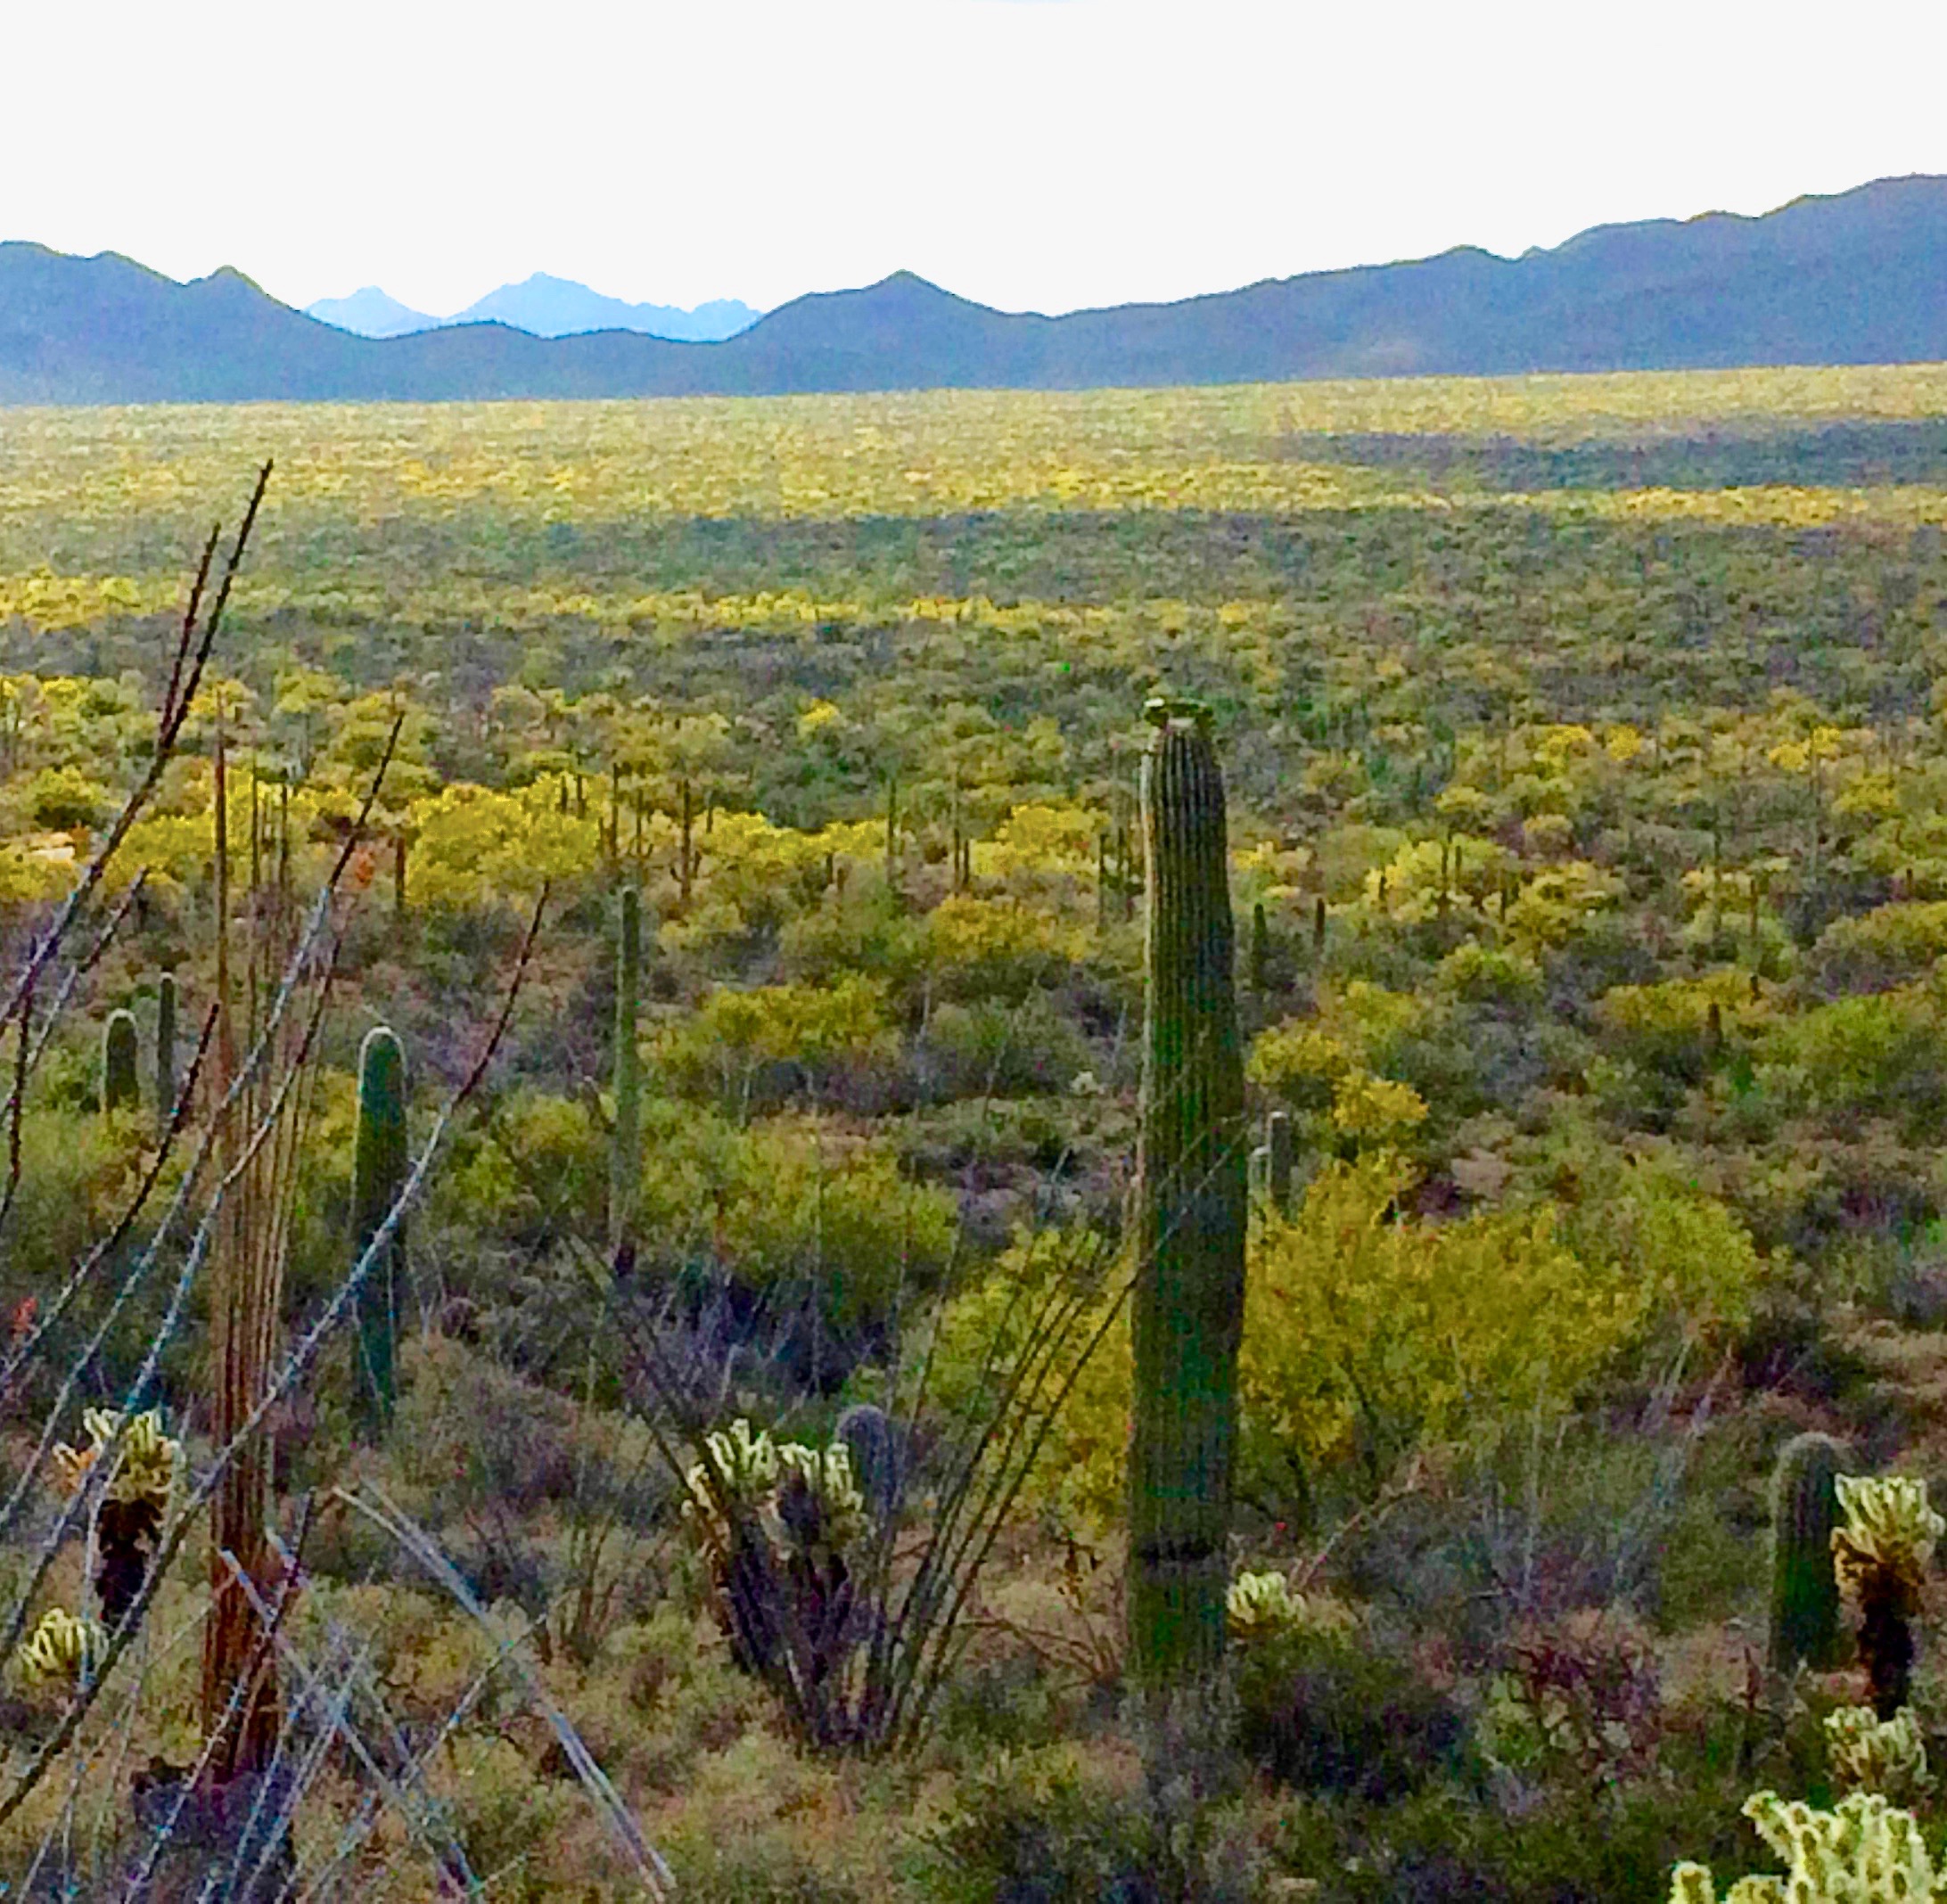 broad view of the desert floor with miles of yellow blooming foothills palo verde trees and mountains in the distance